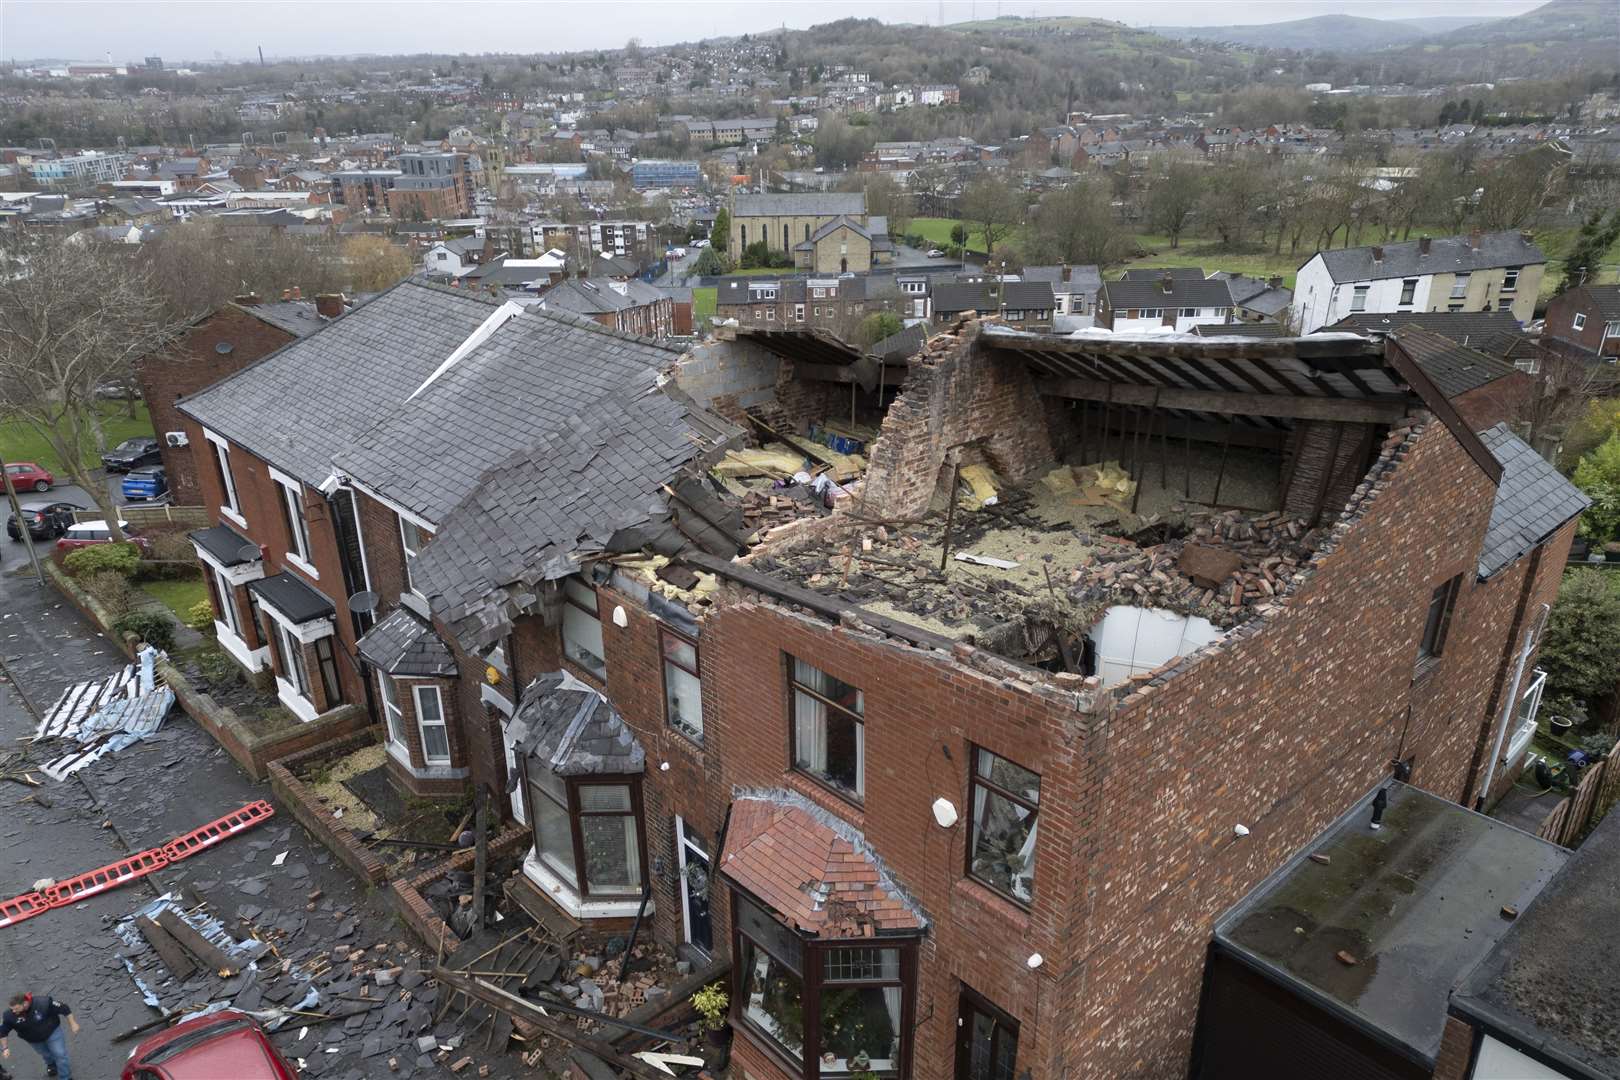 The ‘localised tornado’ ripped off roofs and brought down walls (AP Photo/Jon Super)